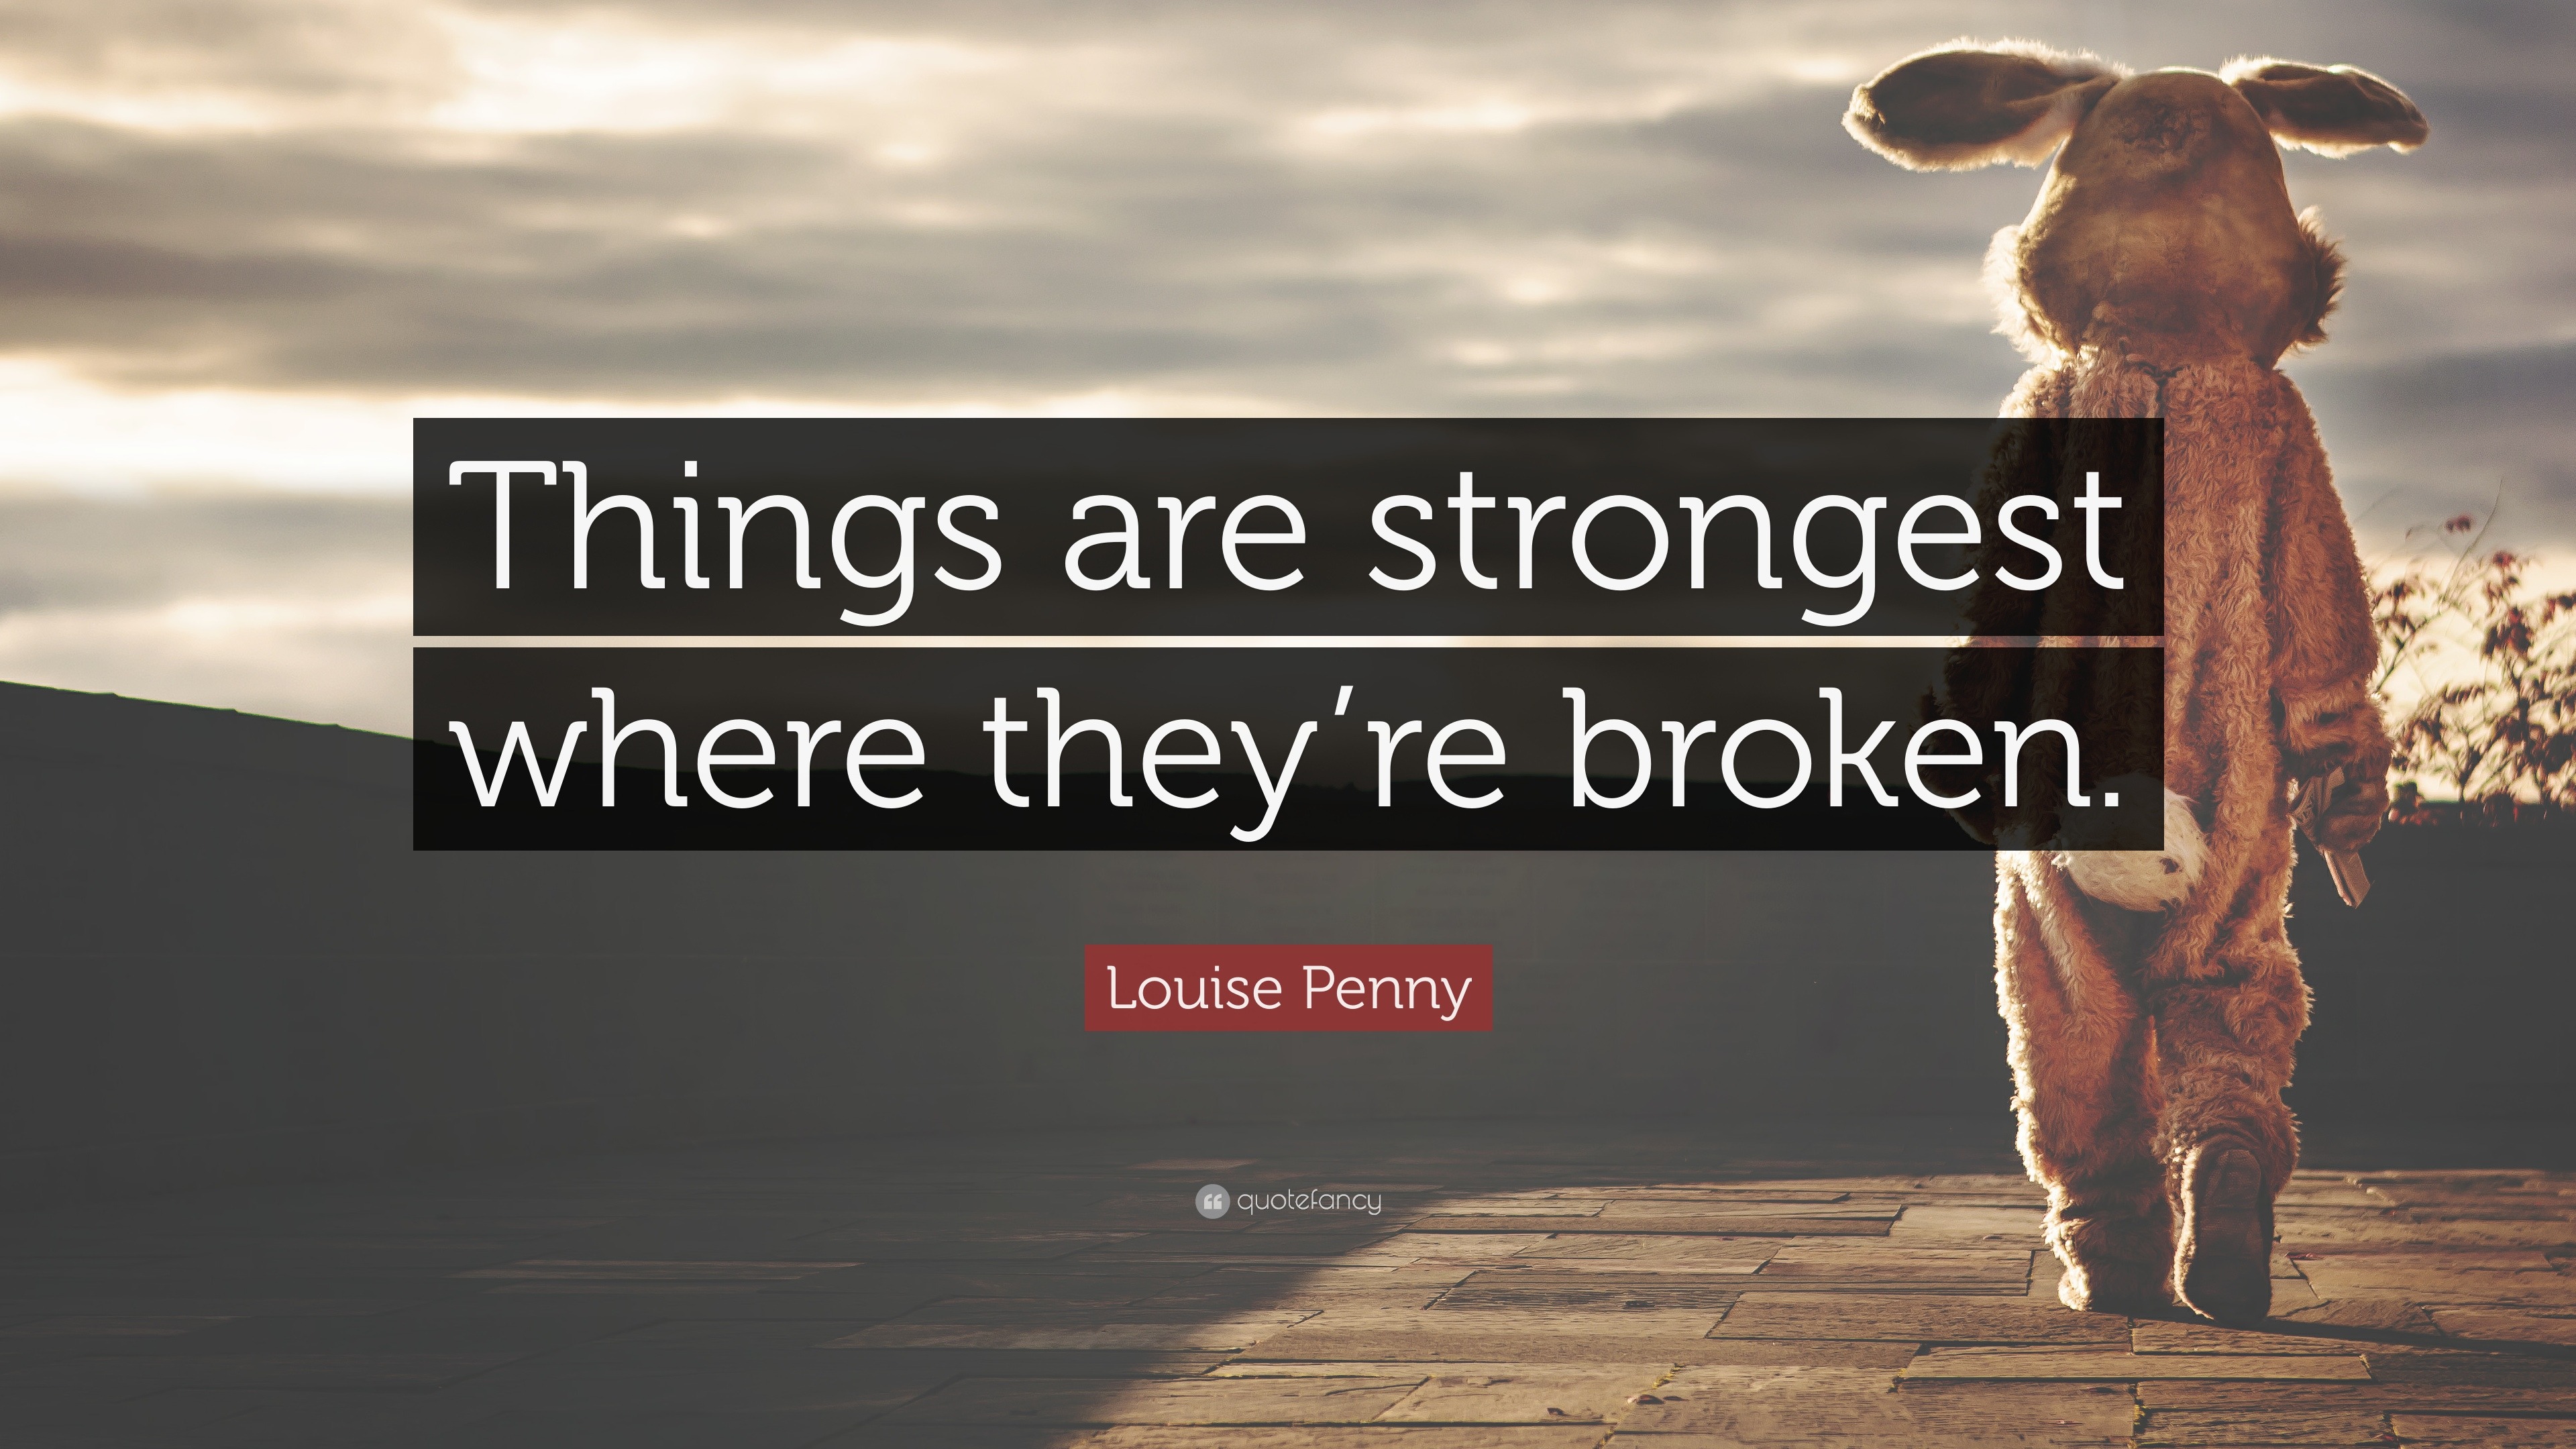 Louise Penny  Inspirational Quote – Shop Iowa